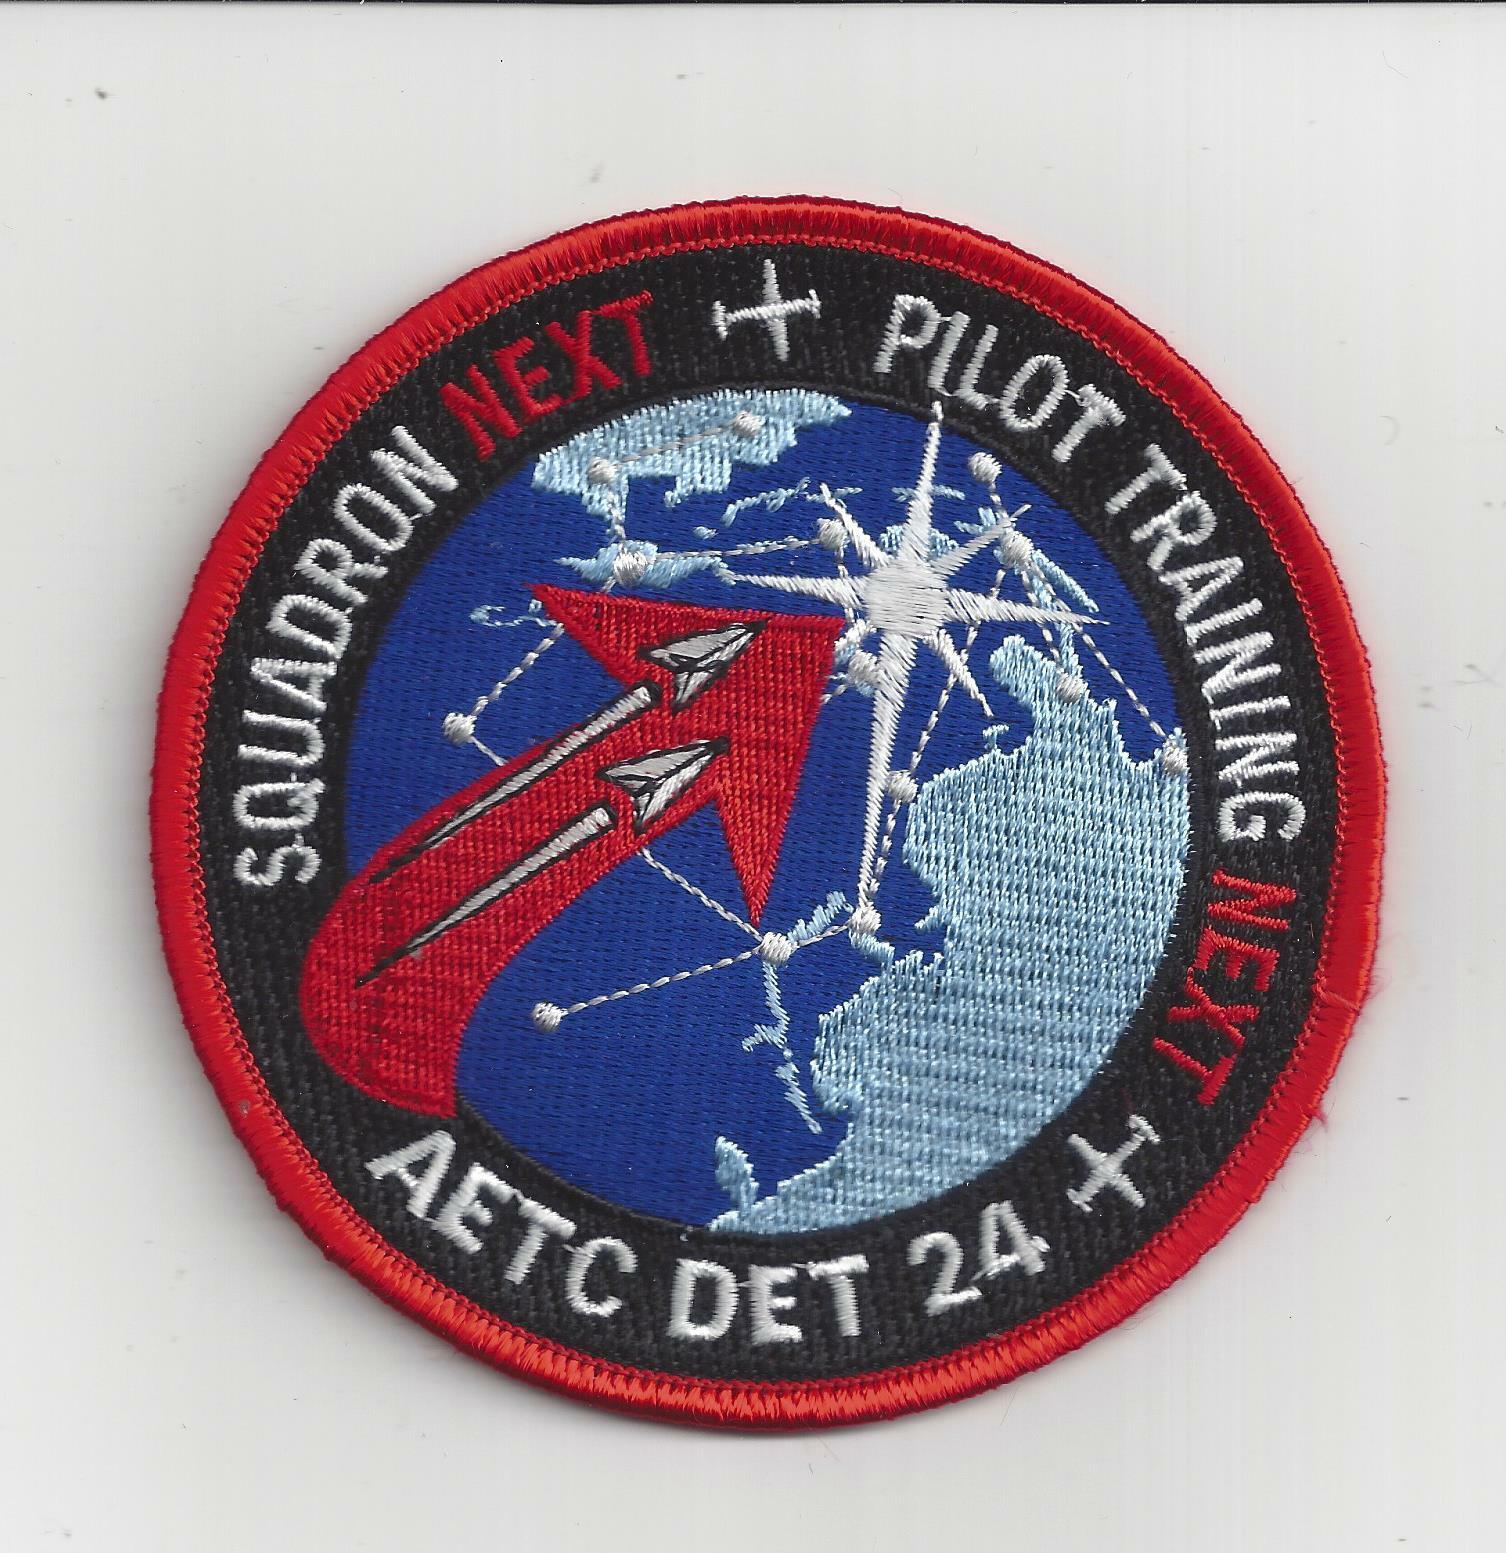 PATCH USAF 24TH FTS AETC DET 24 RANDOLPH AFB COLOR